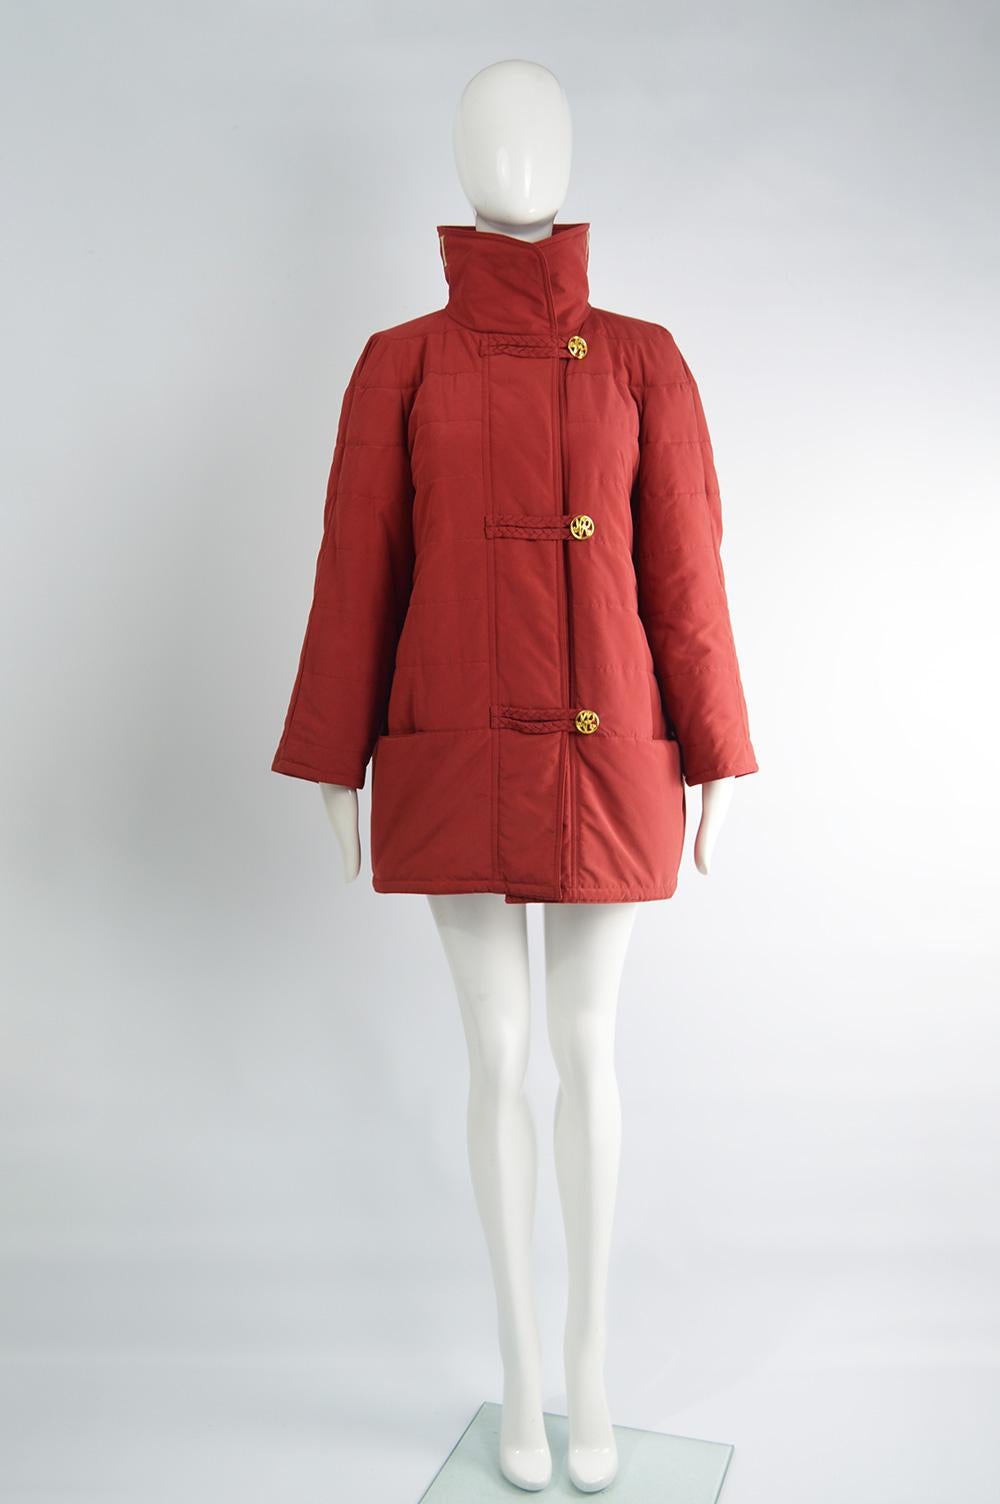 An ultra chic vintage womens Nina Ricci quilted coat from the 80s. In a red lightly quilted fabric with an oversized, swing fit which gives an ultra glamorous look. It has a high neck with leather appliqués spelling out Nina Ricci.

Size: Marked EU